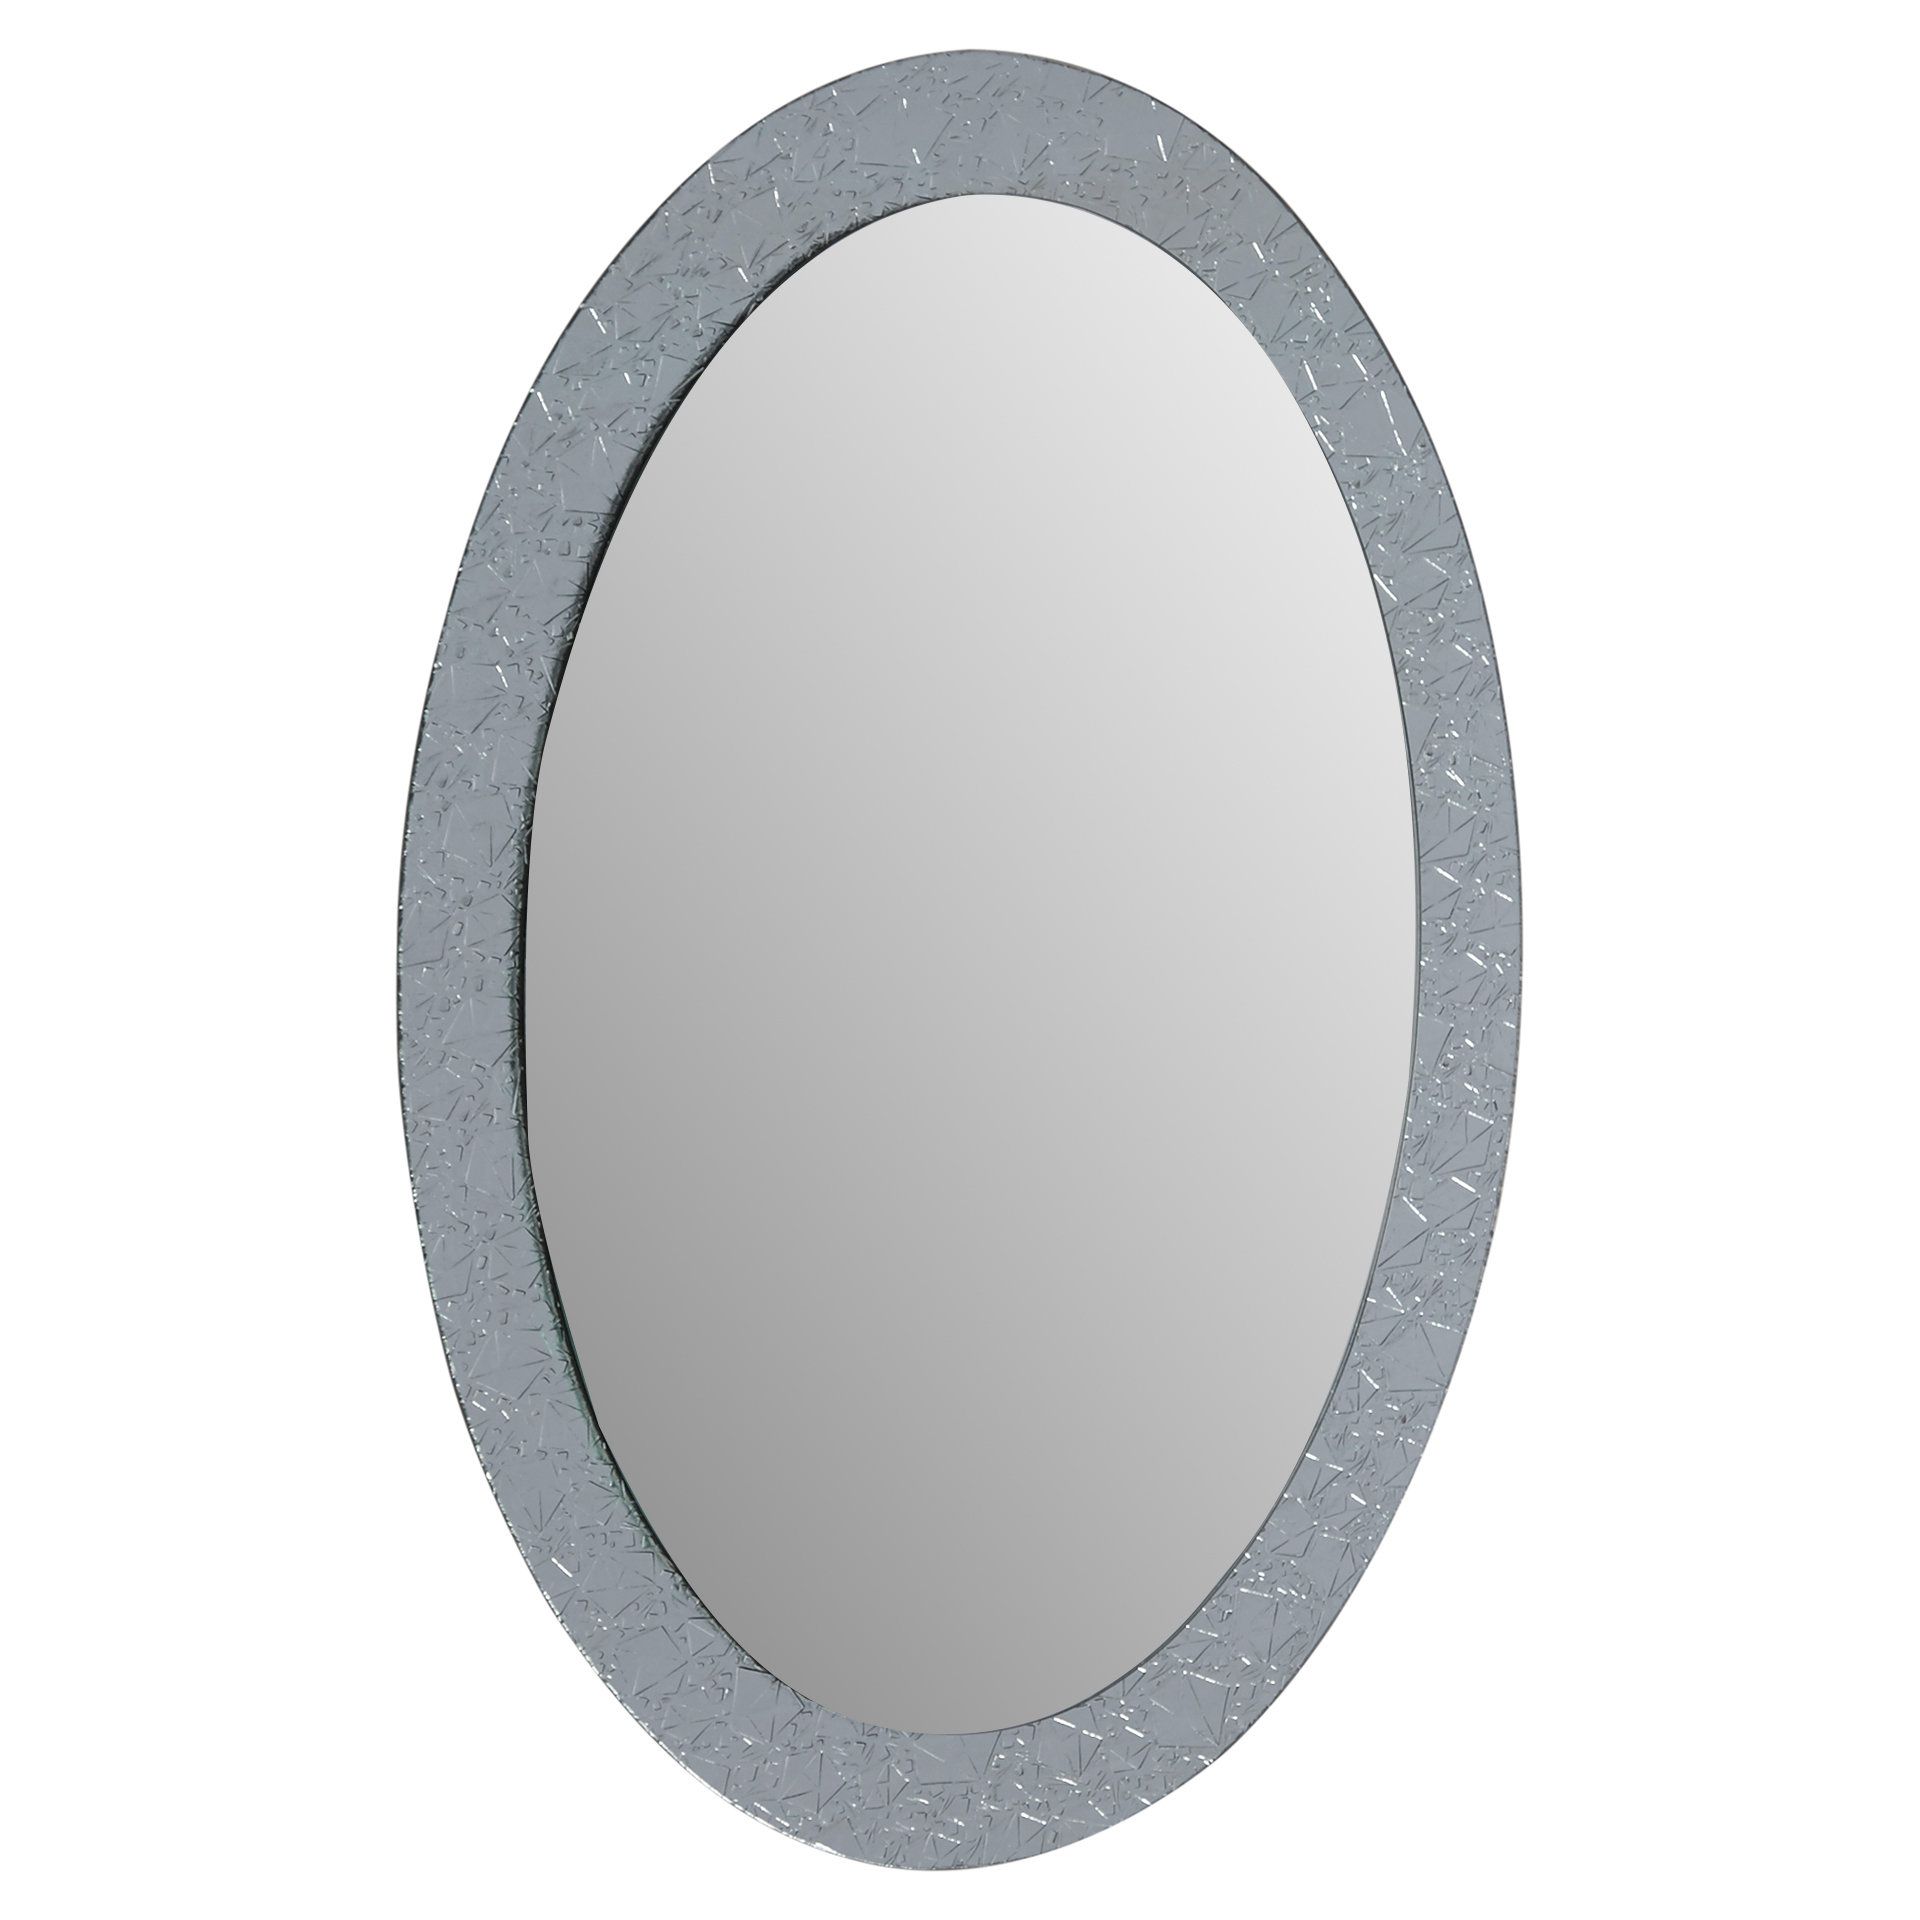 Sajish Oval Crystal Wall Mirror Regarding Point Reyes Molten Round Wall Mirrors (View 22 of 30)